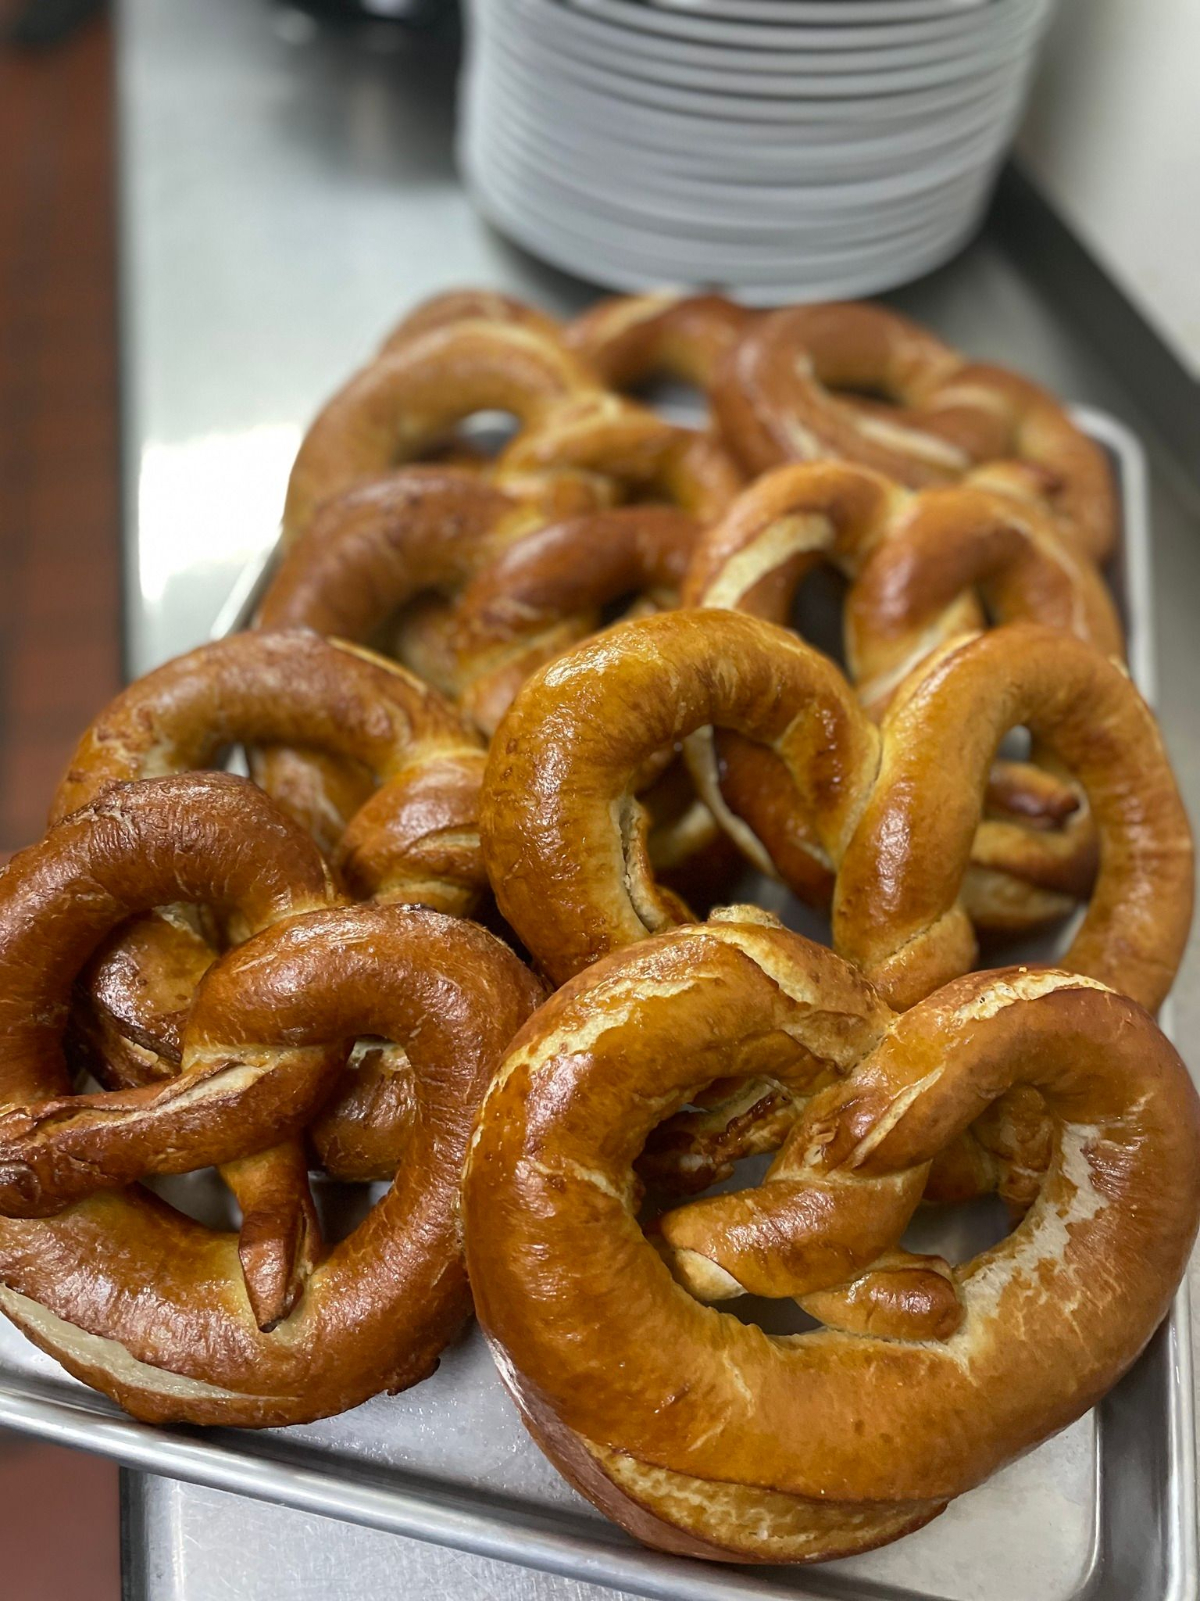 Many made-from-scratch pretzels are stacked in a metal pan in the kitchen of Horsch Radish. Photo from Horsch Radish's Facebook page.